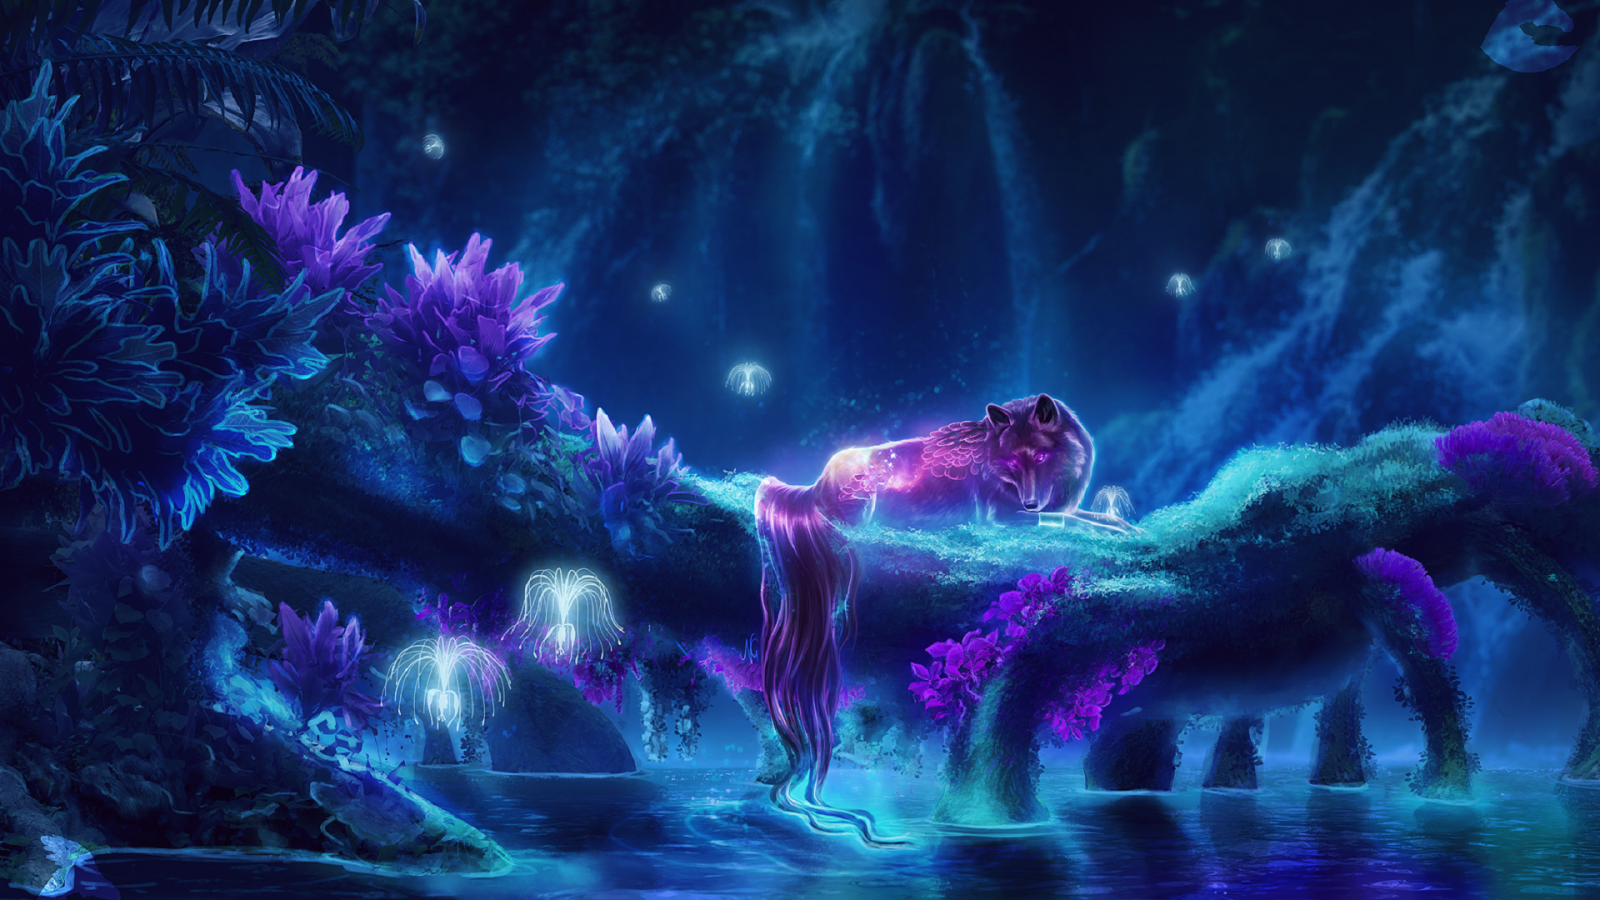 Fantasy Creature, Wolf, Forest, Water, Magical Creatures, Water Creatures